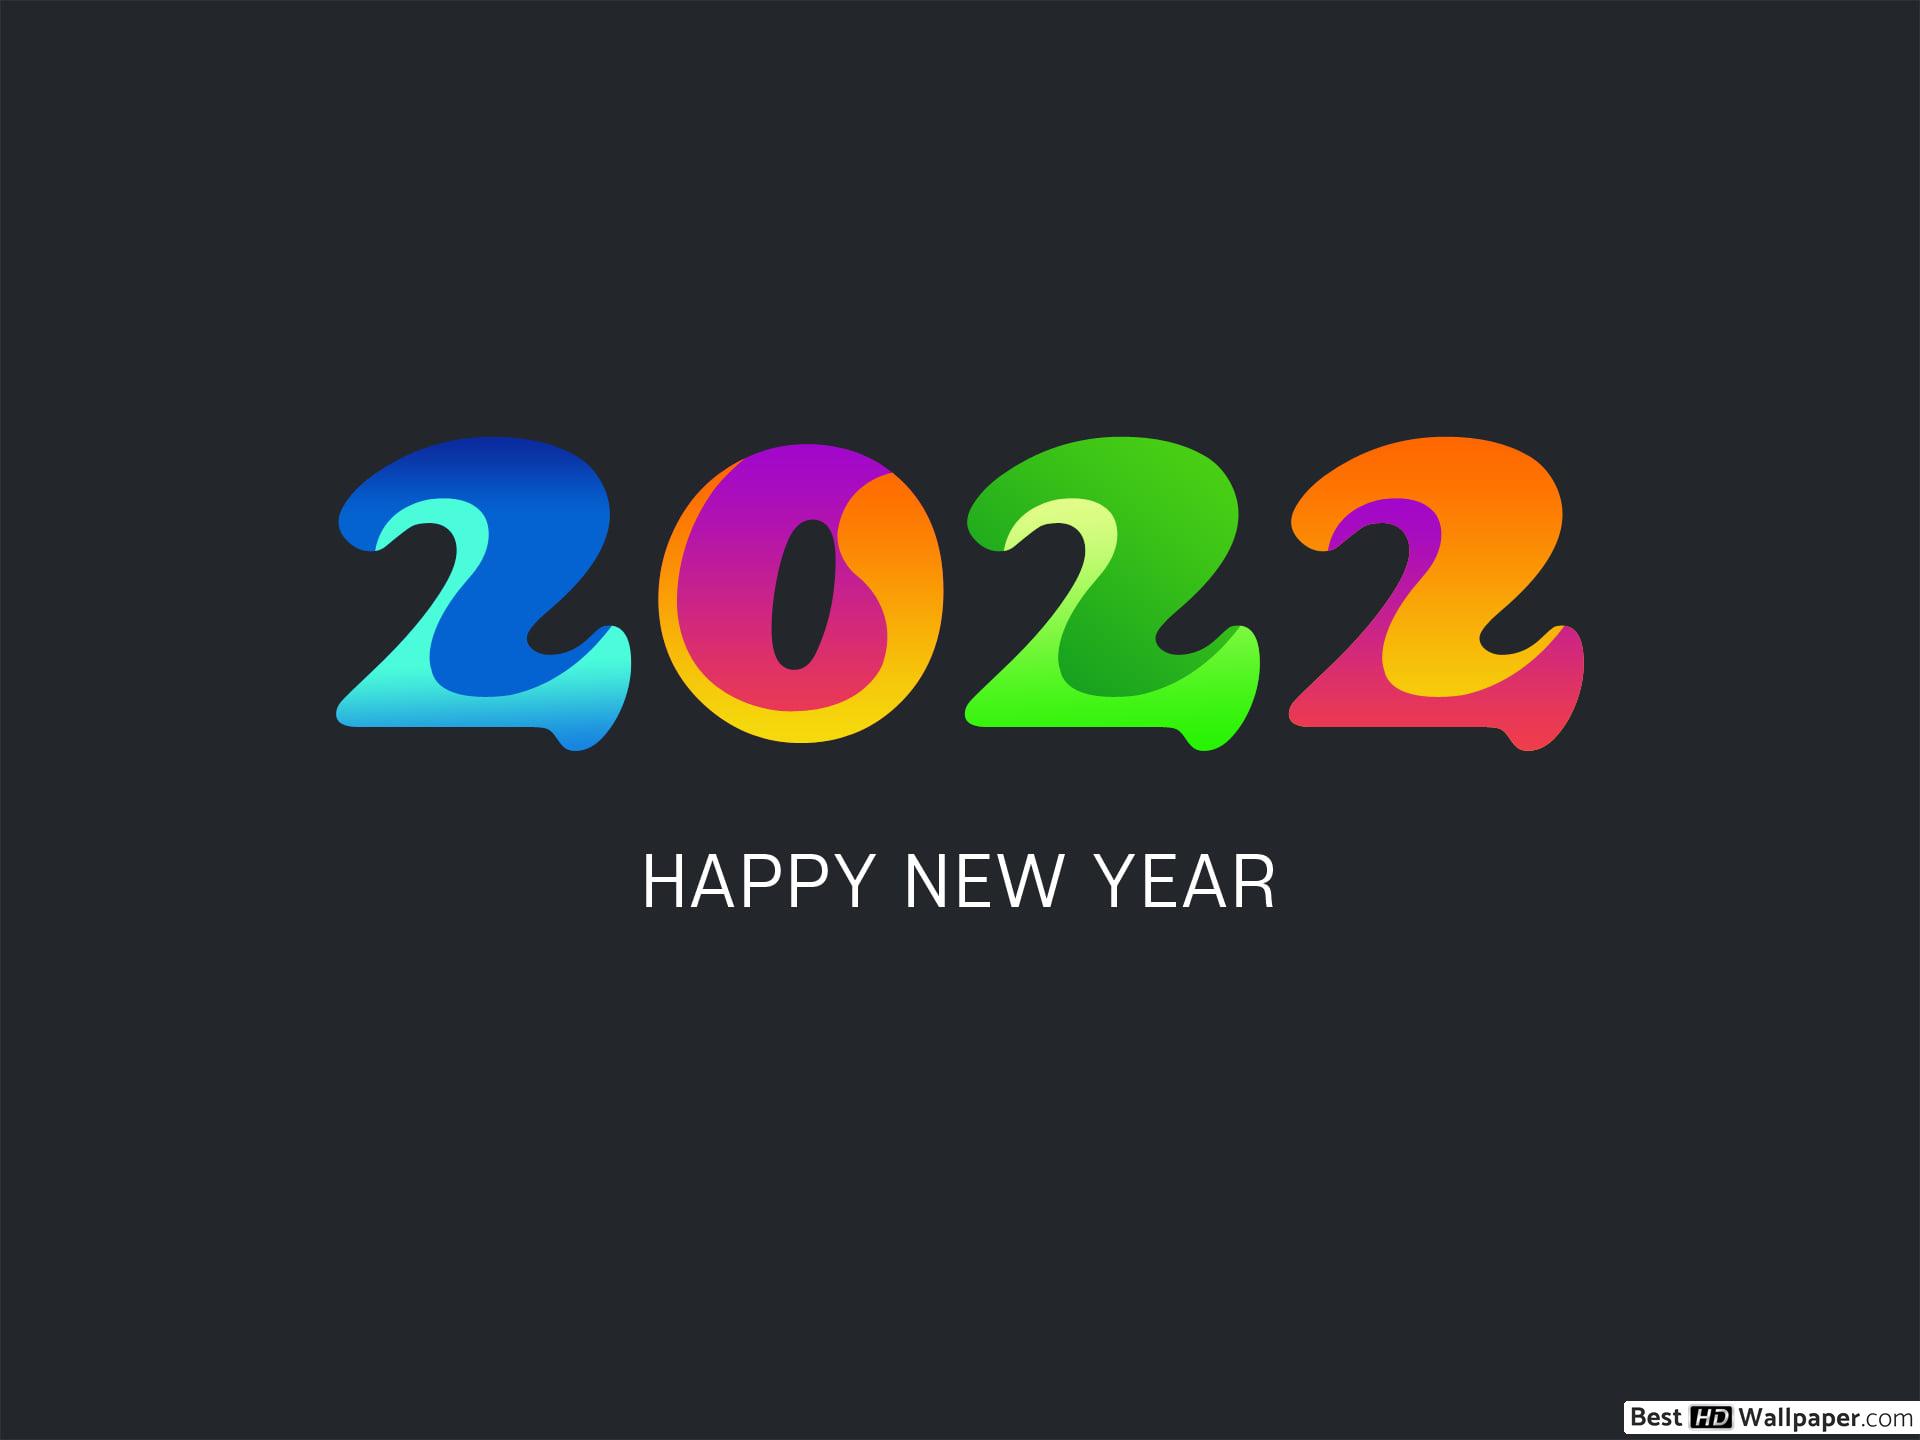 Wallpapers happy new year 2022 multi-colored 2022 on the desktop